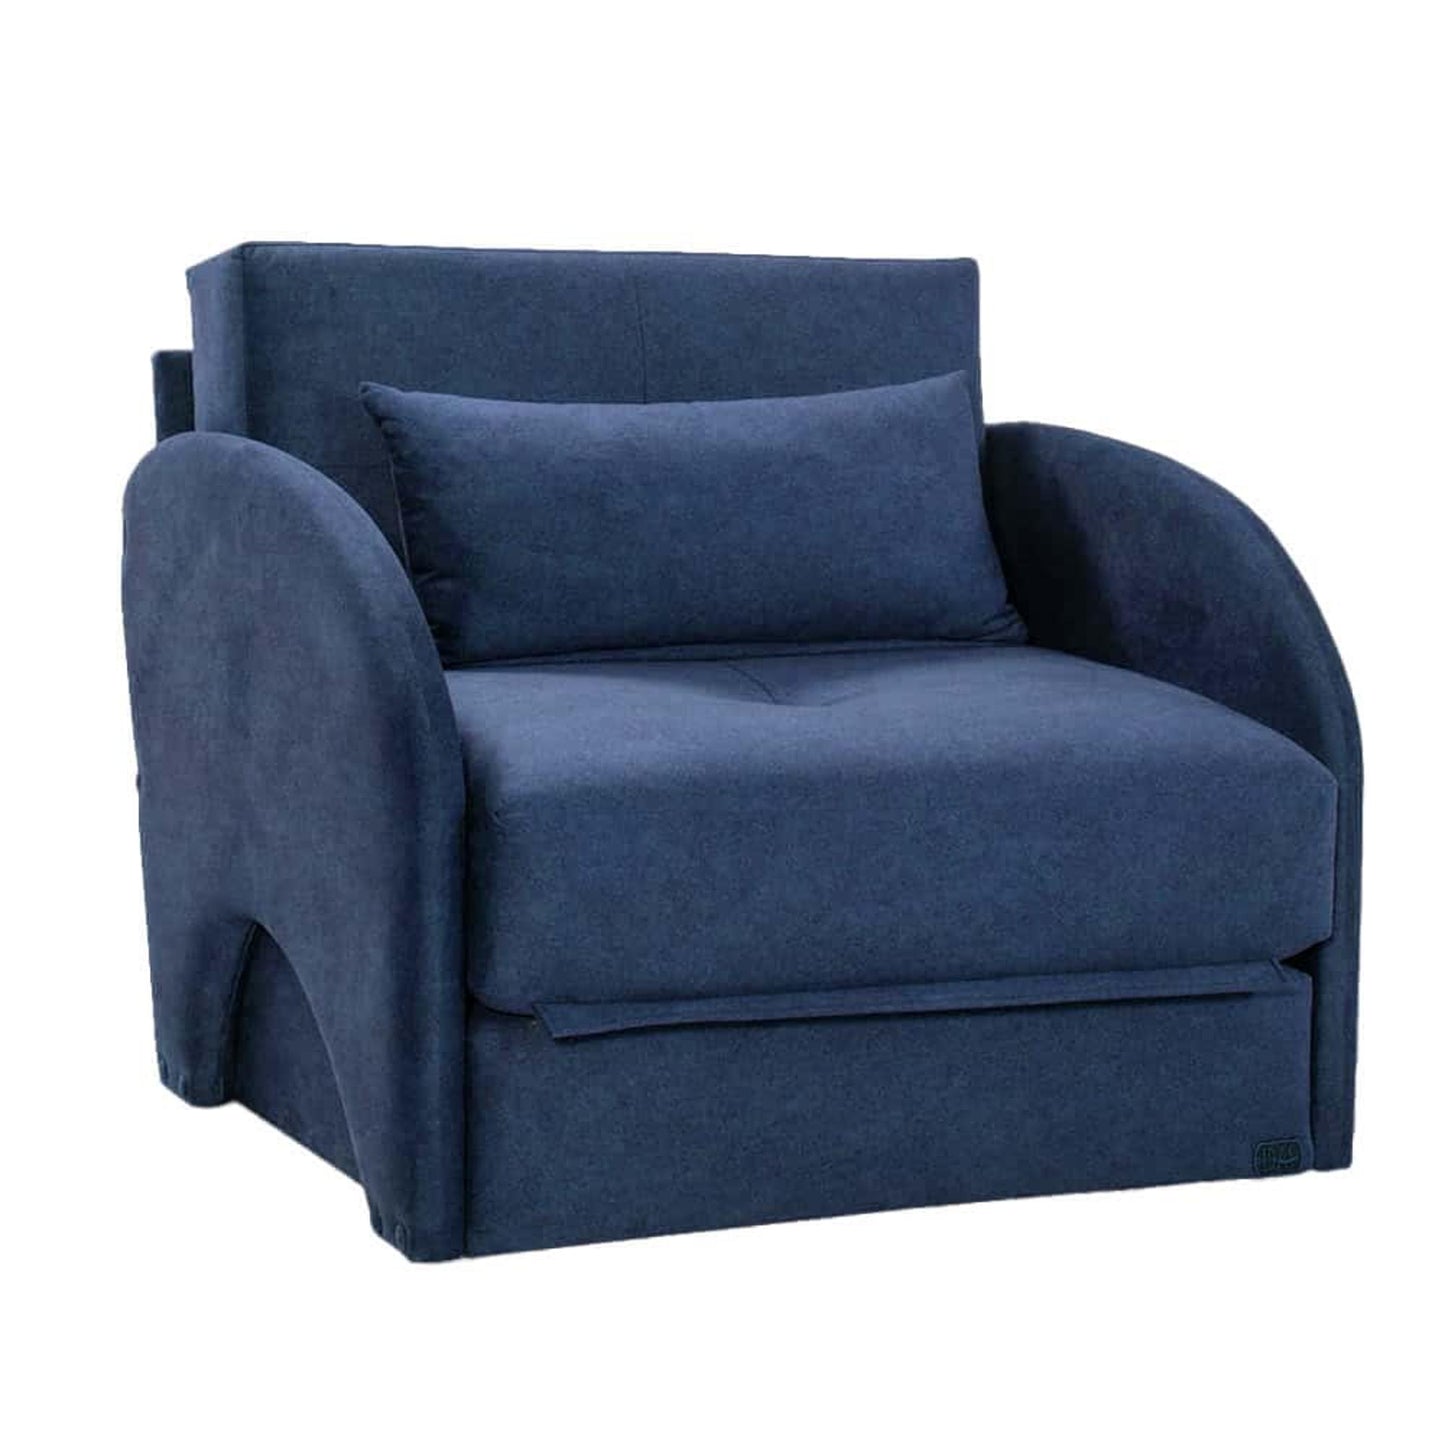 Easy-Flip Deluxe Chair Bed in Blue Fabric